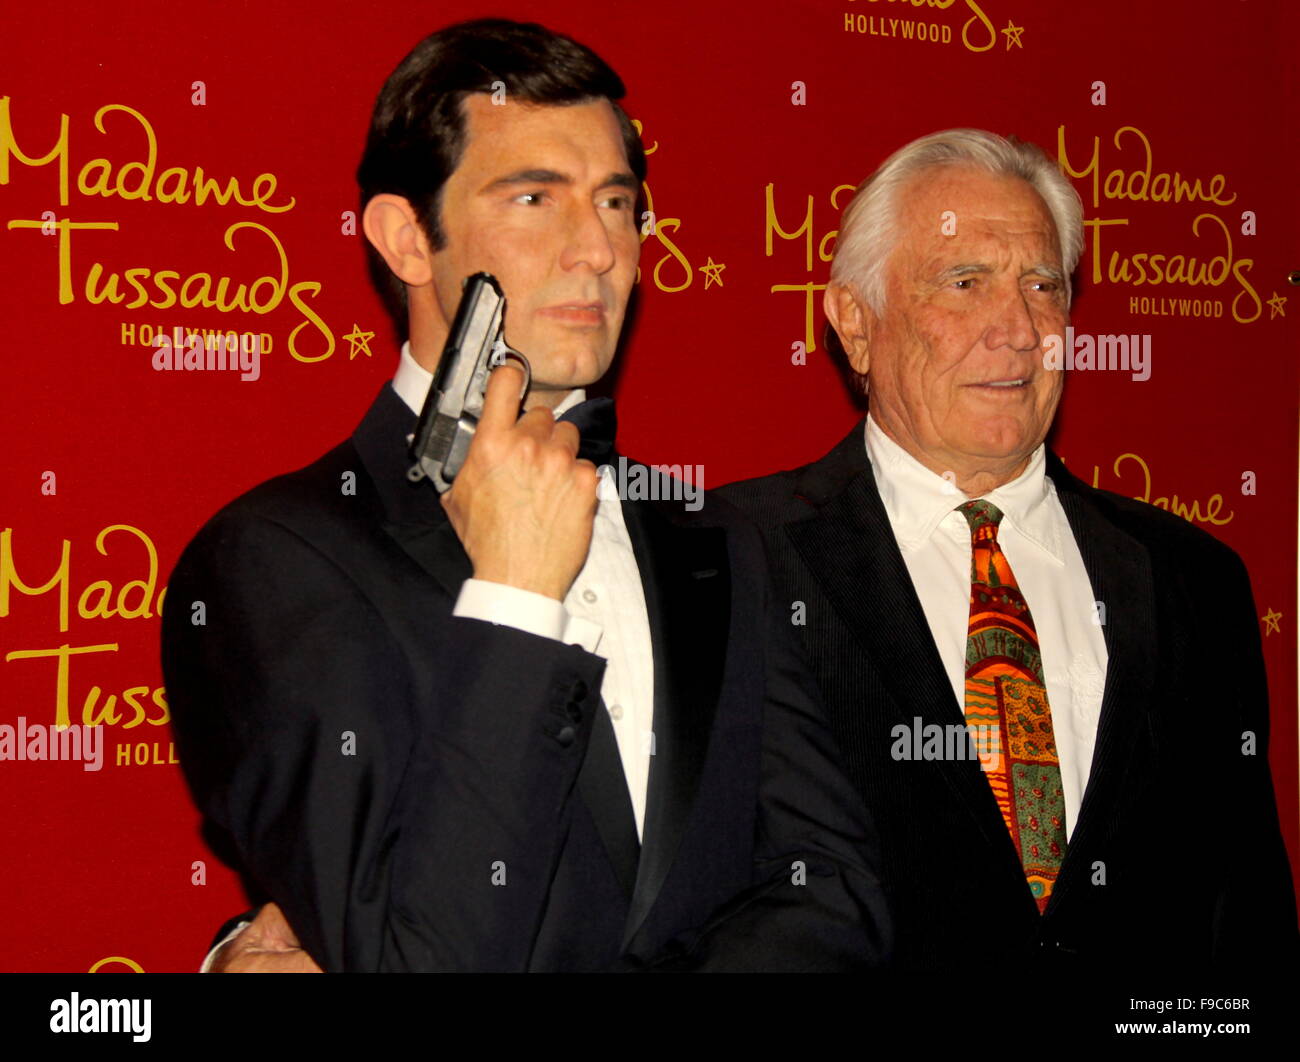 Hollywood, California, USA. 14th Dec, 2015. I15797CHW.Madame Tussauds Hollywood Reveal All Six James Bonds In Wax With Special Guest George Lazenby Madame Tussauds-Hollywood, Hollywood, CA.12152015.GEORGE LAZENBY POSING WITH A WAX FIGURE OF HIS JAMES BOND CHARACTER .©Clinton H. WallacePhotomundo International Photos Inc © Clinton WallaceGlobe Photos/ZUMA Wire/Alamy Live News Stock Photo